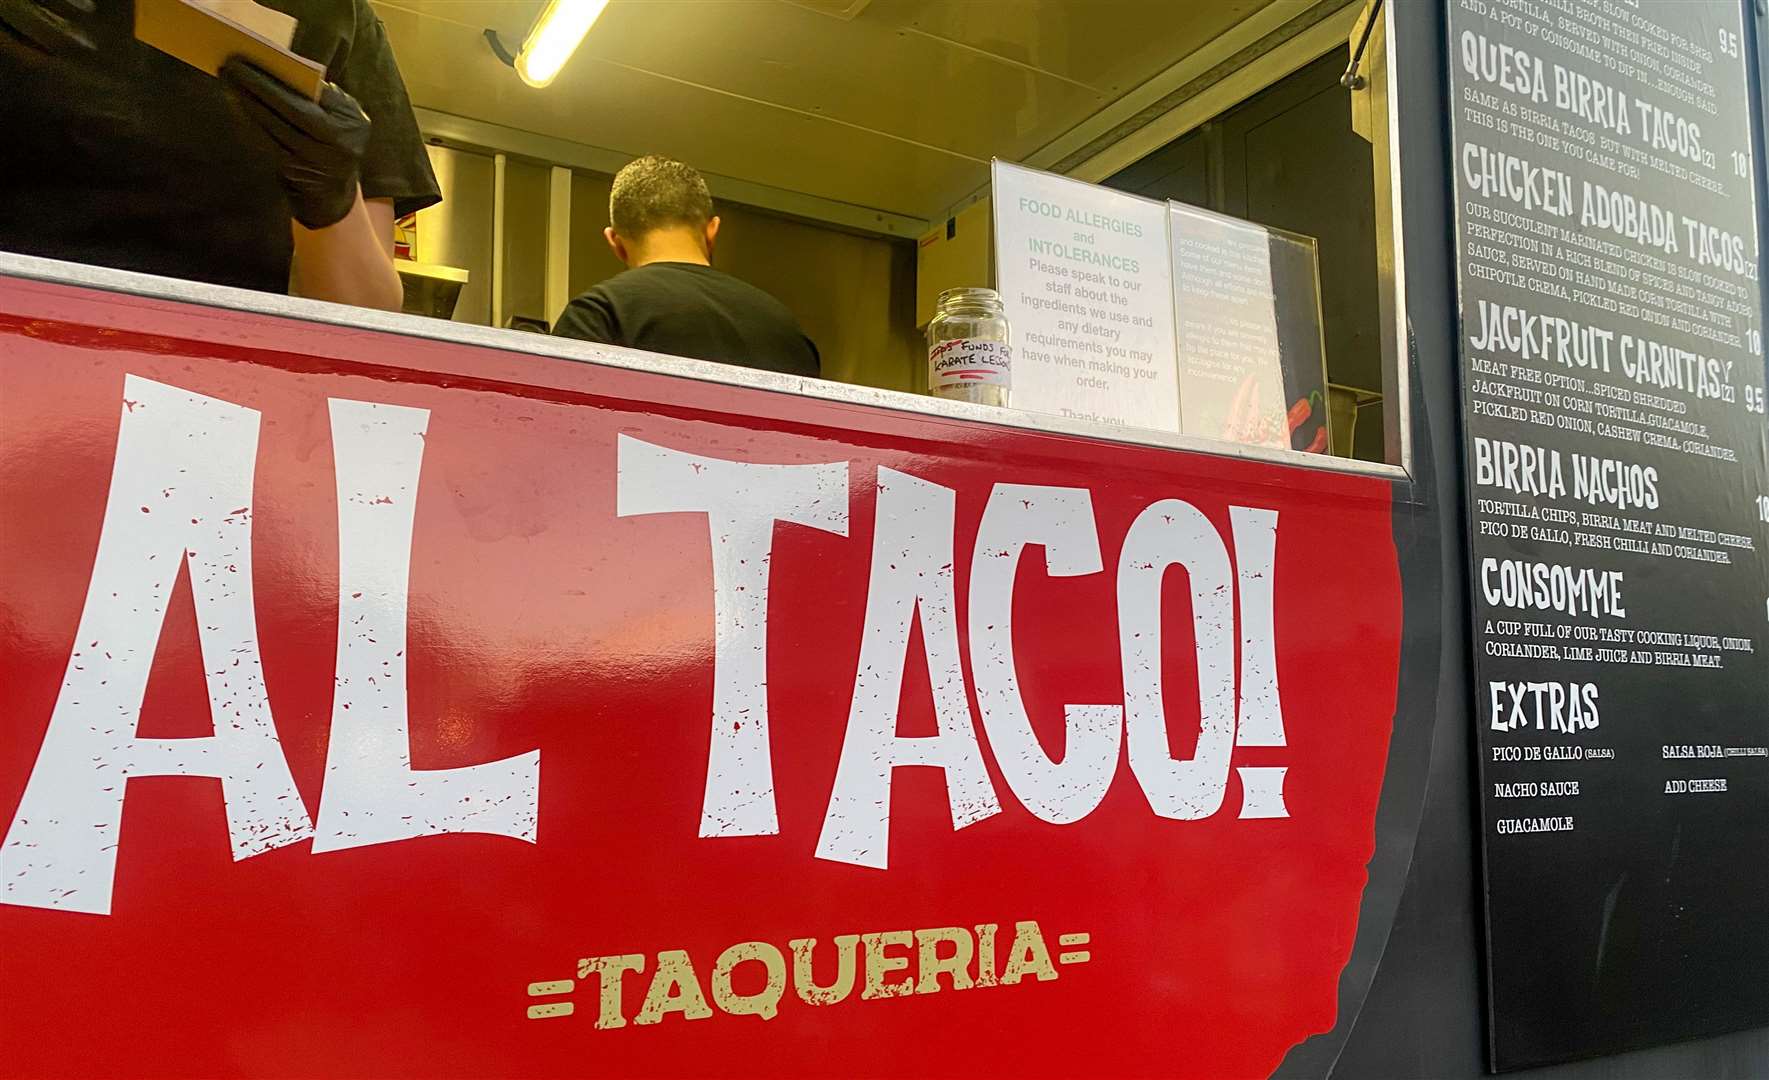 Our first stop was Al Taco, a Mexican-inspired food truck hidden away at the back